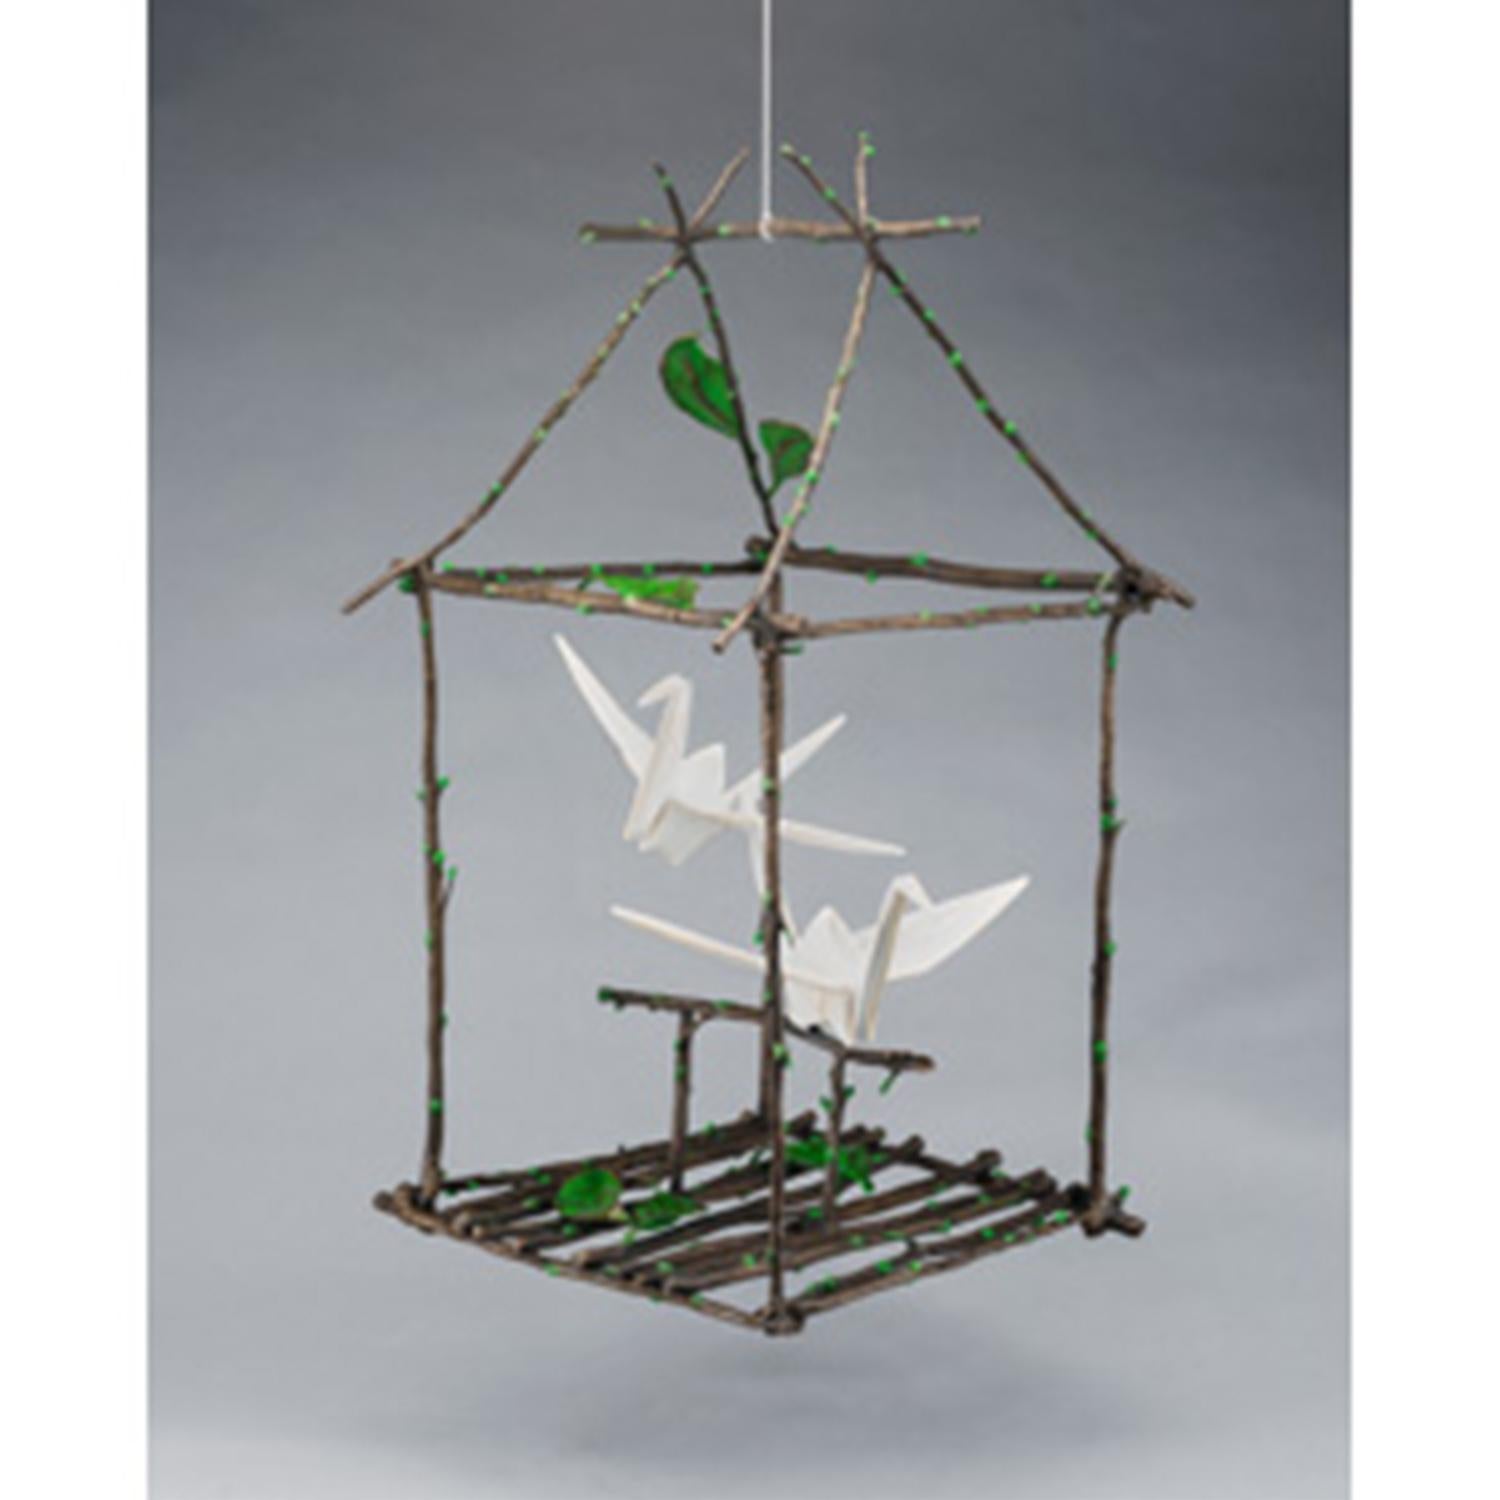 Kevin Box Figurative Sculpture - Spirit House (Small - Hanging) Ed. 9/24